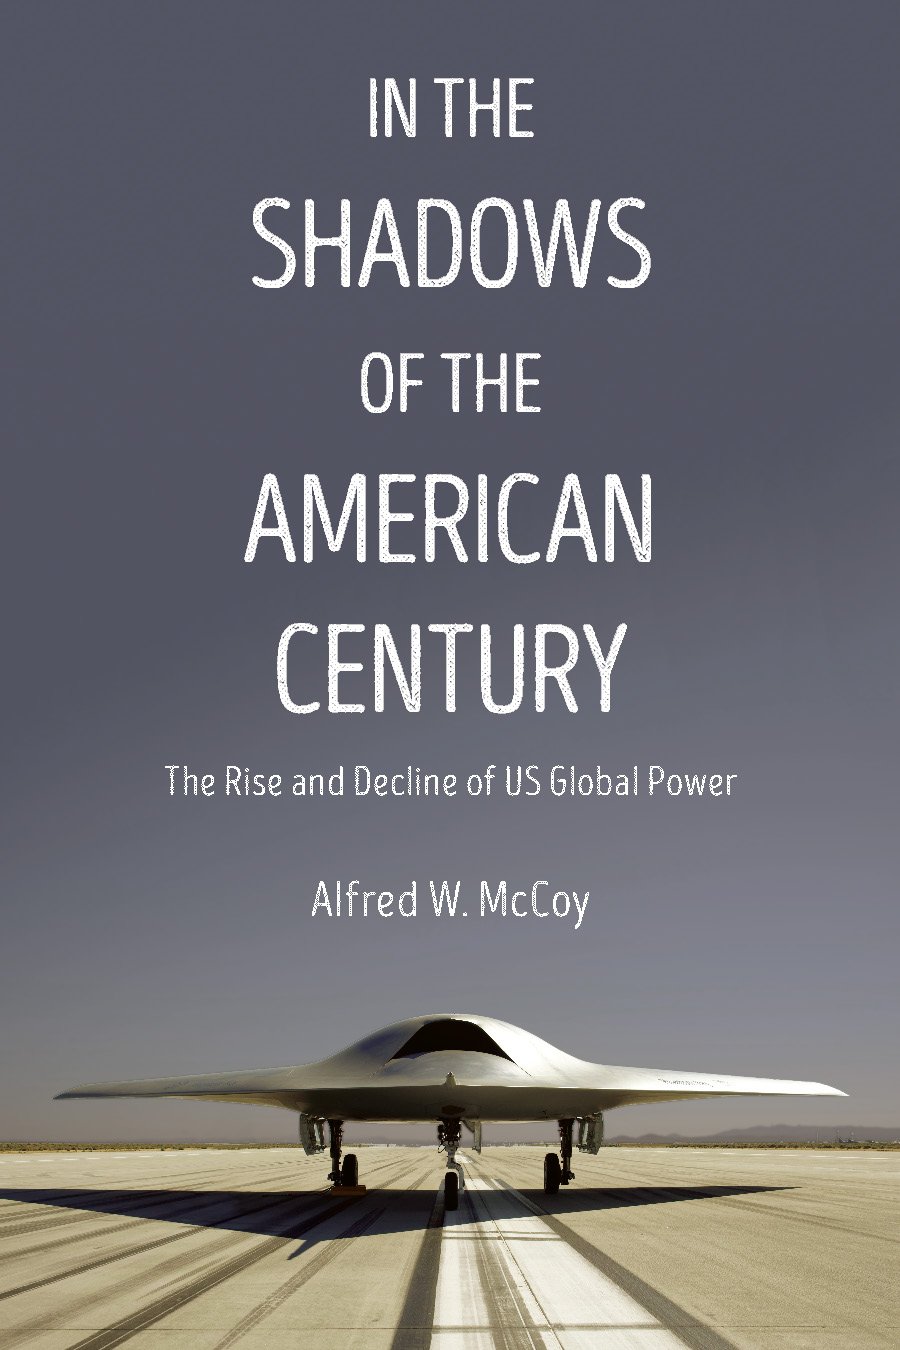 in the shadows of the american century: the rise and decline of u.s. global power